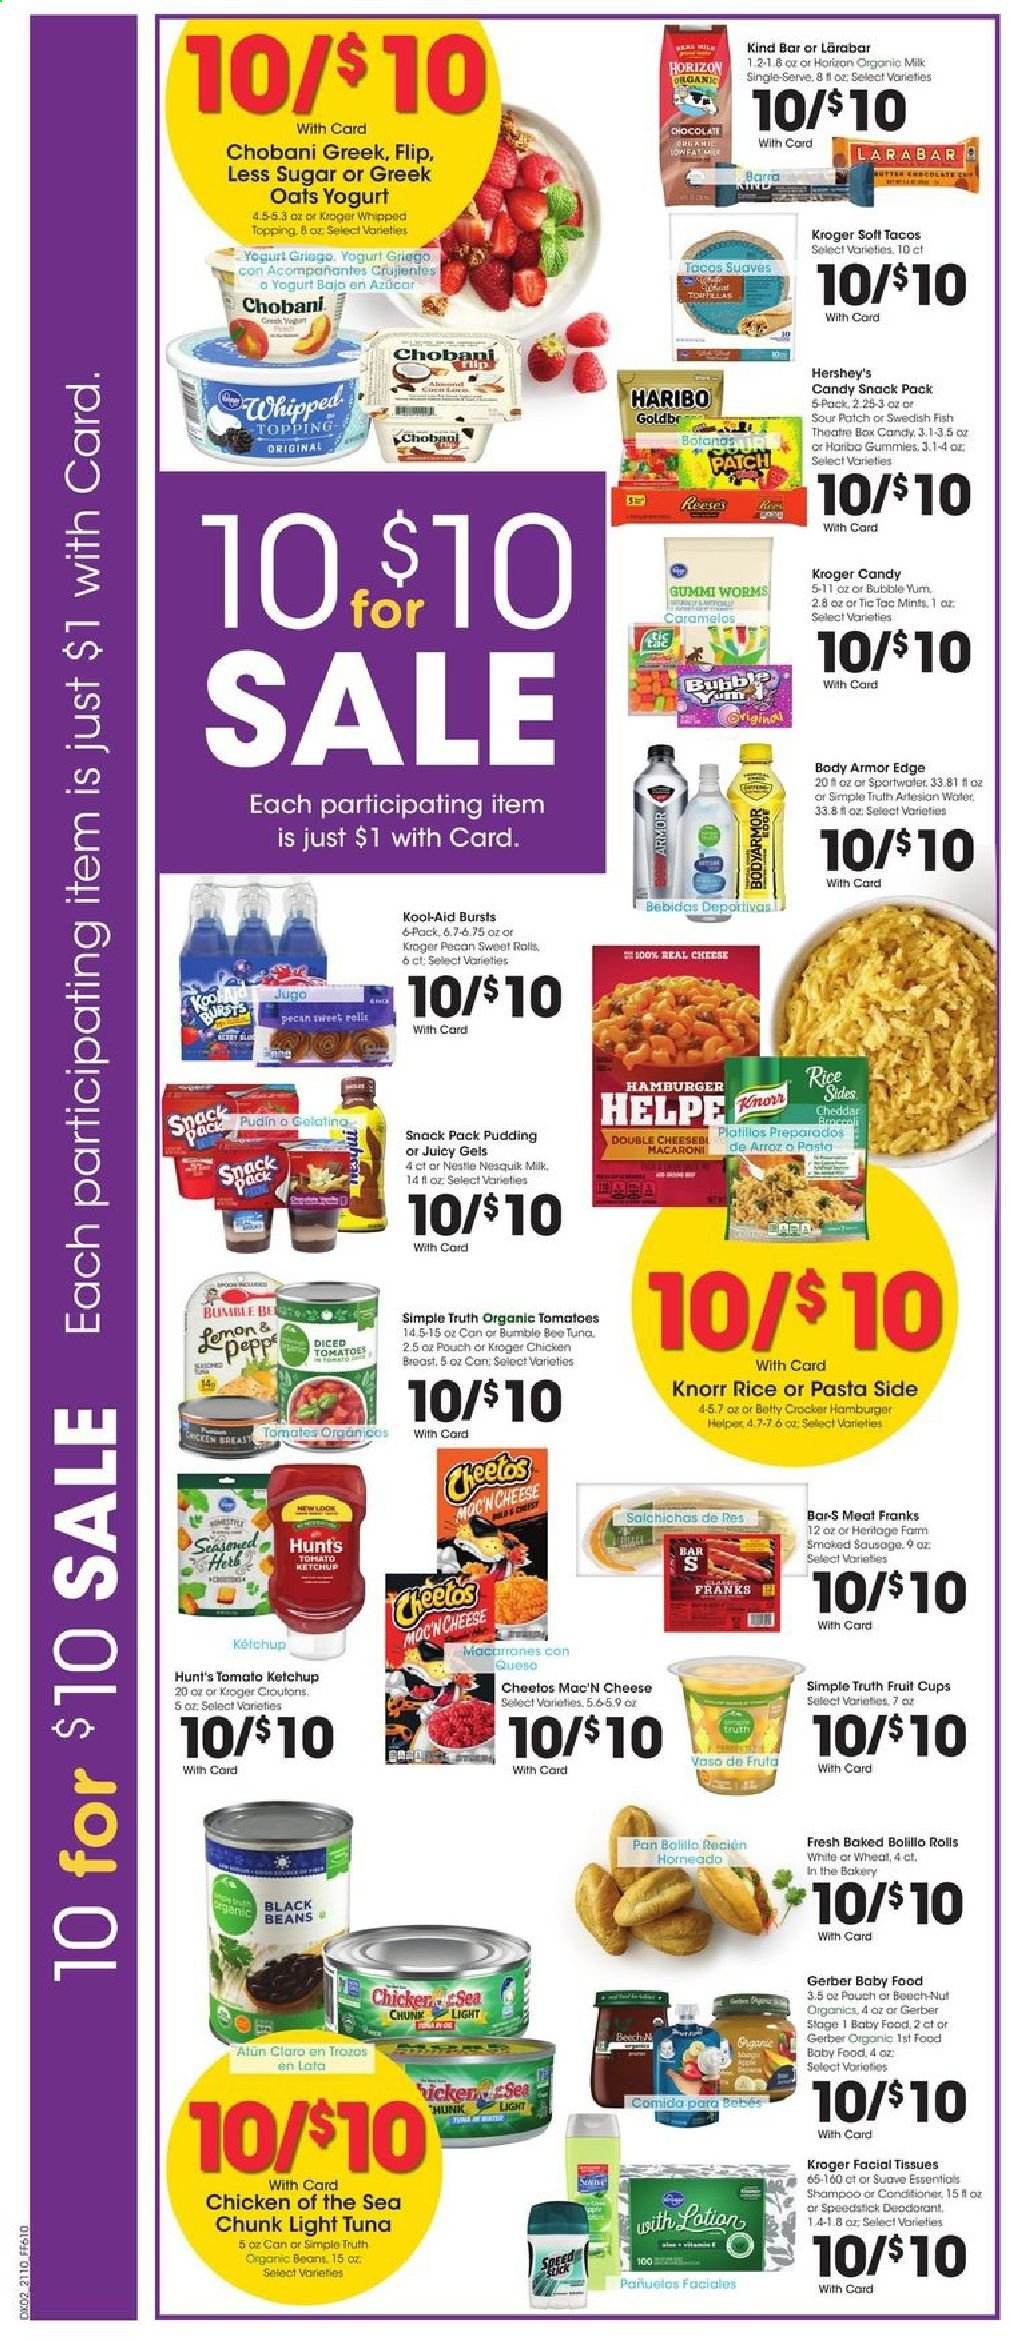 thumbnail - Fry’s Flyer - 04/07/2021 - 04/13/2021 - Sales products - fruit cup, tacos, beans, tomatoes, tuna, Bumble Bee, Knorr, sausage, smoked sausage, cheddar, cheese, pudding, yoghurt, Chobani, organic milk, Reese's, Hershey's, Haribo, Nesquik, Tic Tac, Gerber, Cheetos, croutons, topping, light tuna, Chicken of the Sea, black beans, macaroni, pasta, herbs, ketchup, tissues, shampoo, Suave, facial tissues, conditioner, anti-perspirant, deodorant, pan. Page 4.